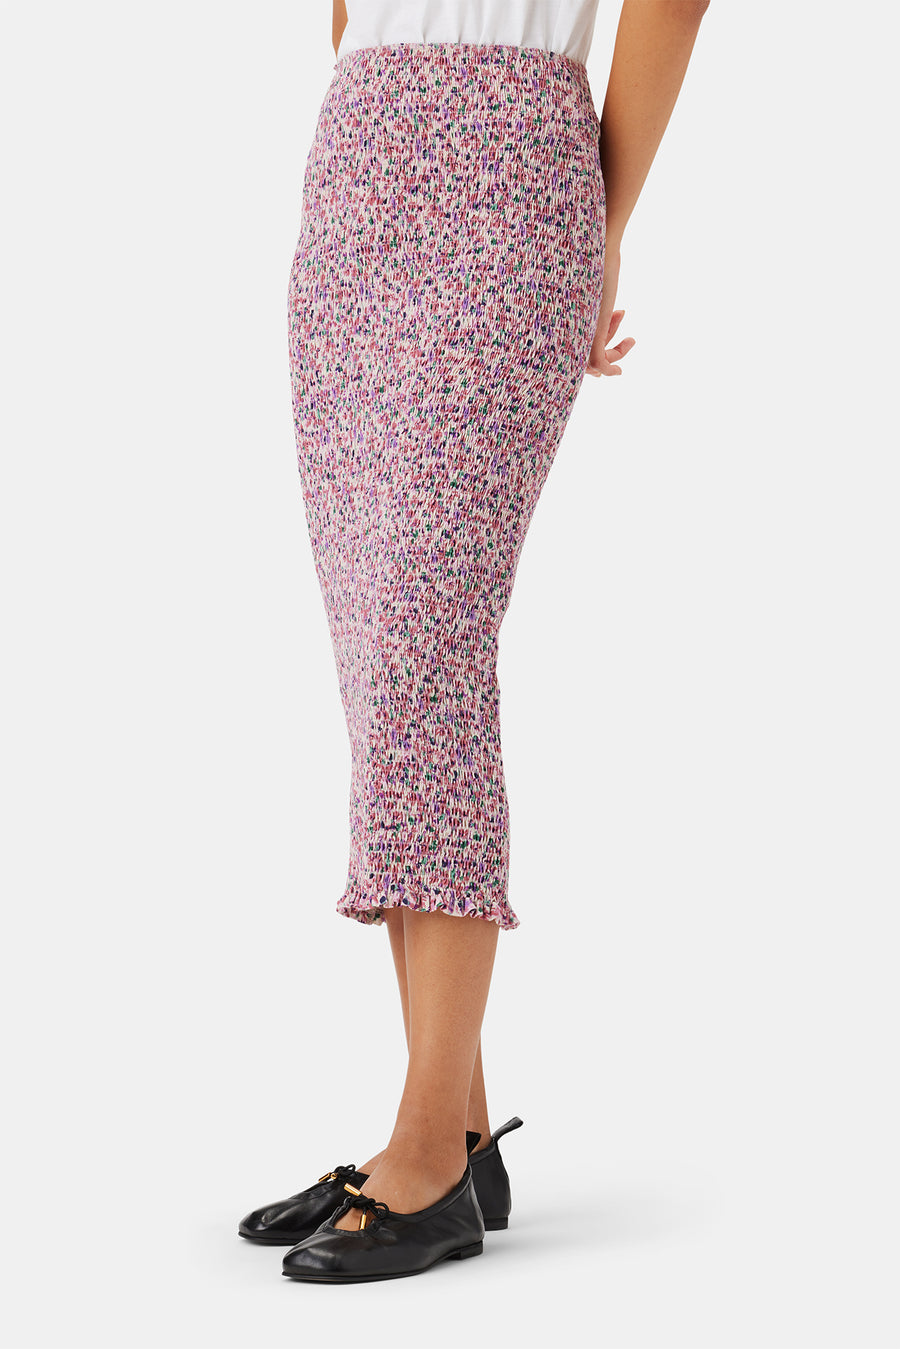 Eunice Skirt - Alessia Mulberry